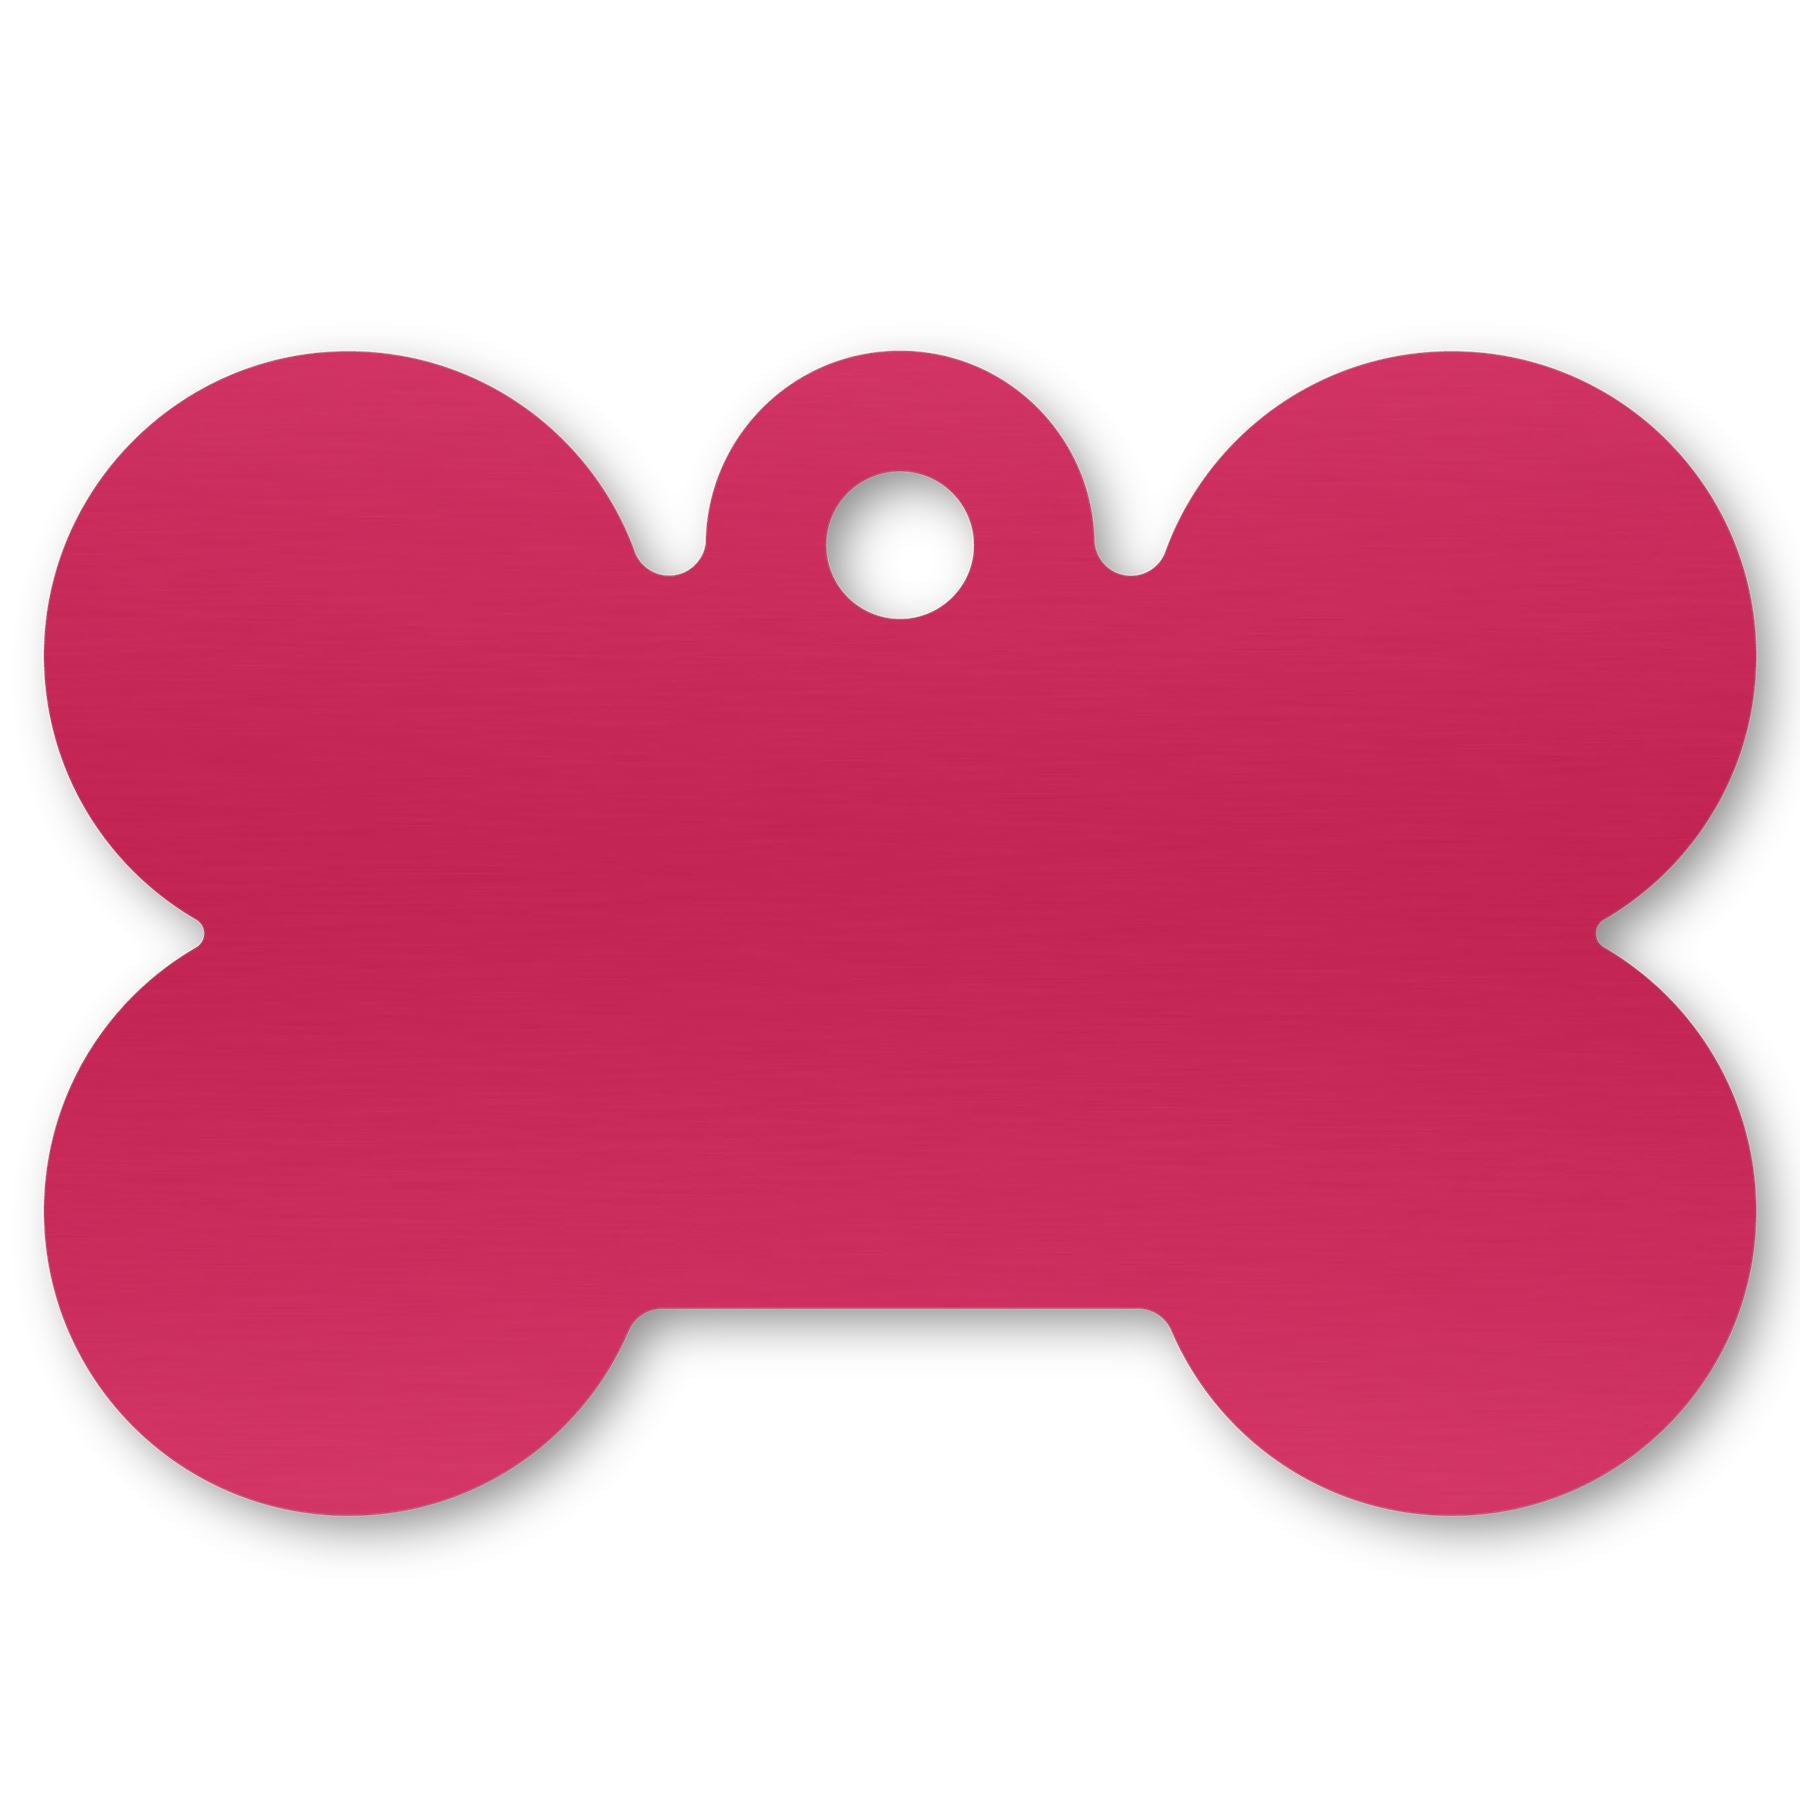 Anodized Aluminum Dog Bone Shaped Tags, 3/4" x 1-1/16" with 3/32" Hole, Laser Engraved Metal Tags Craftworks NW Pink 